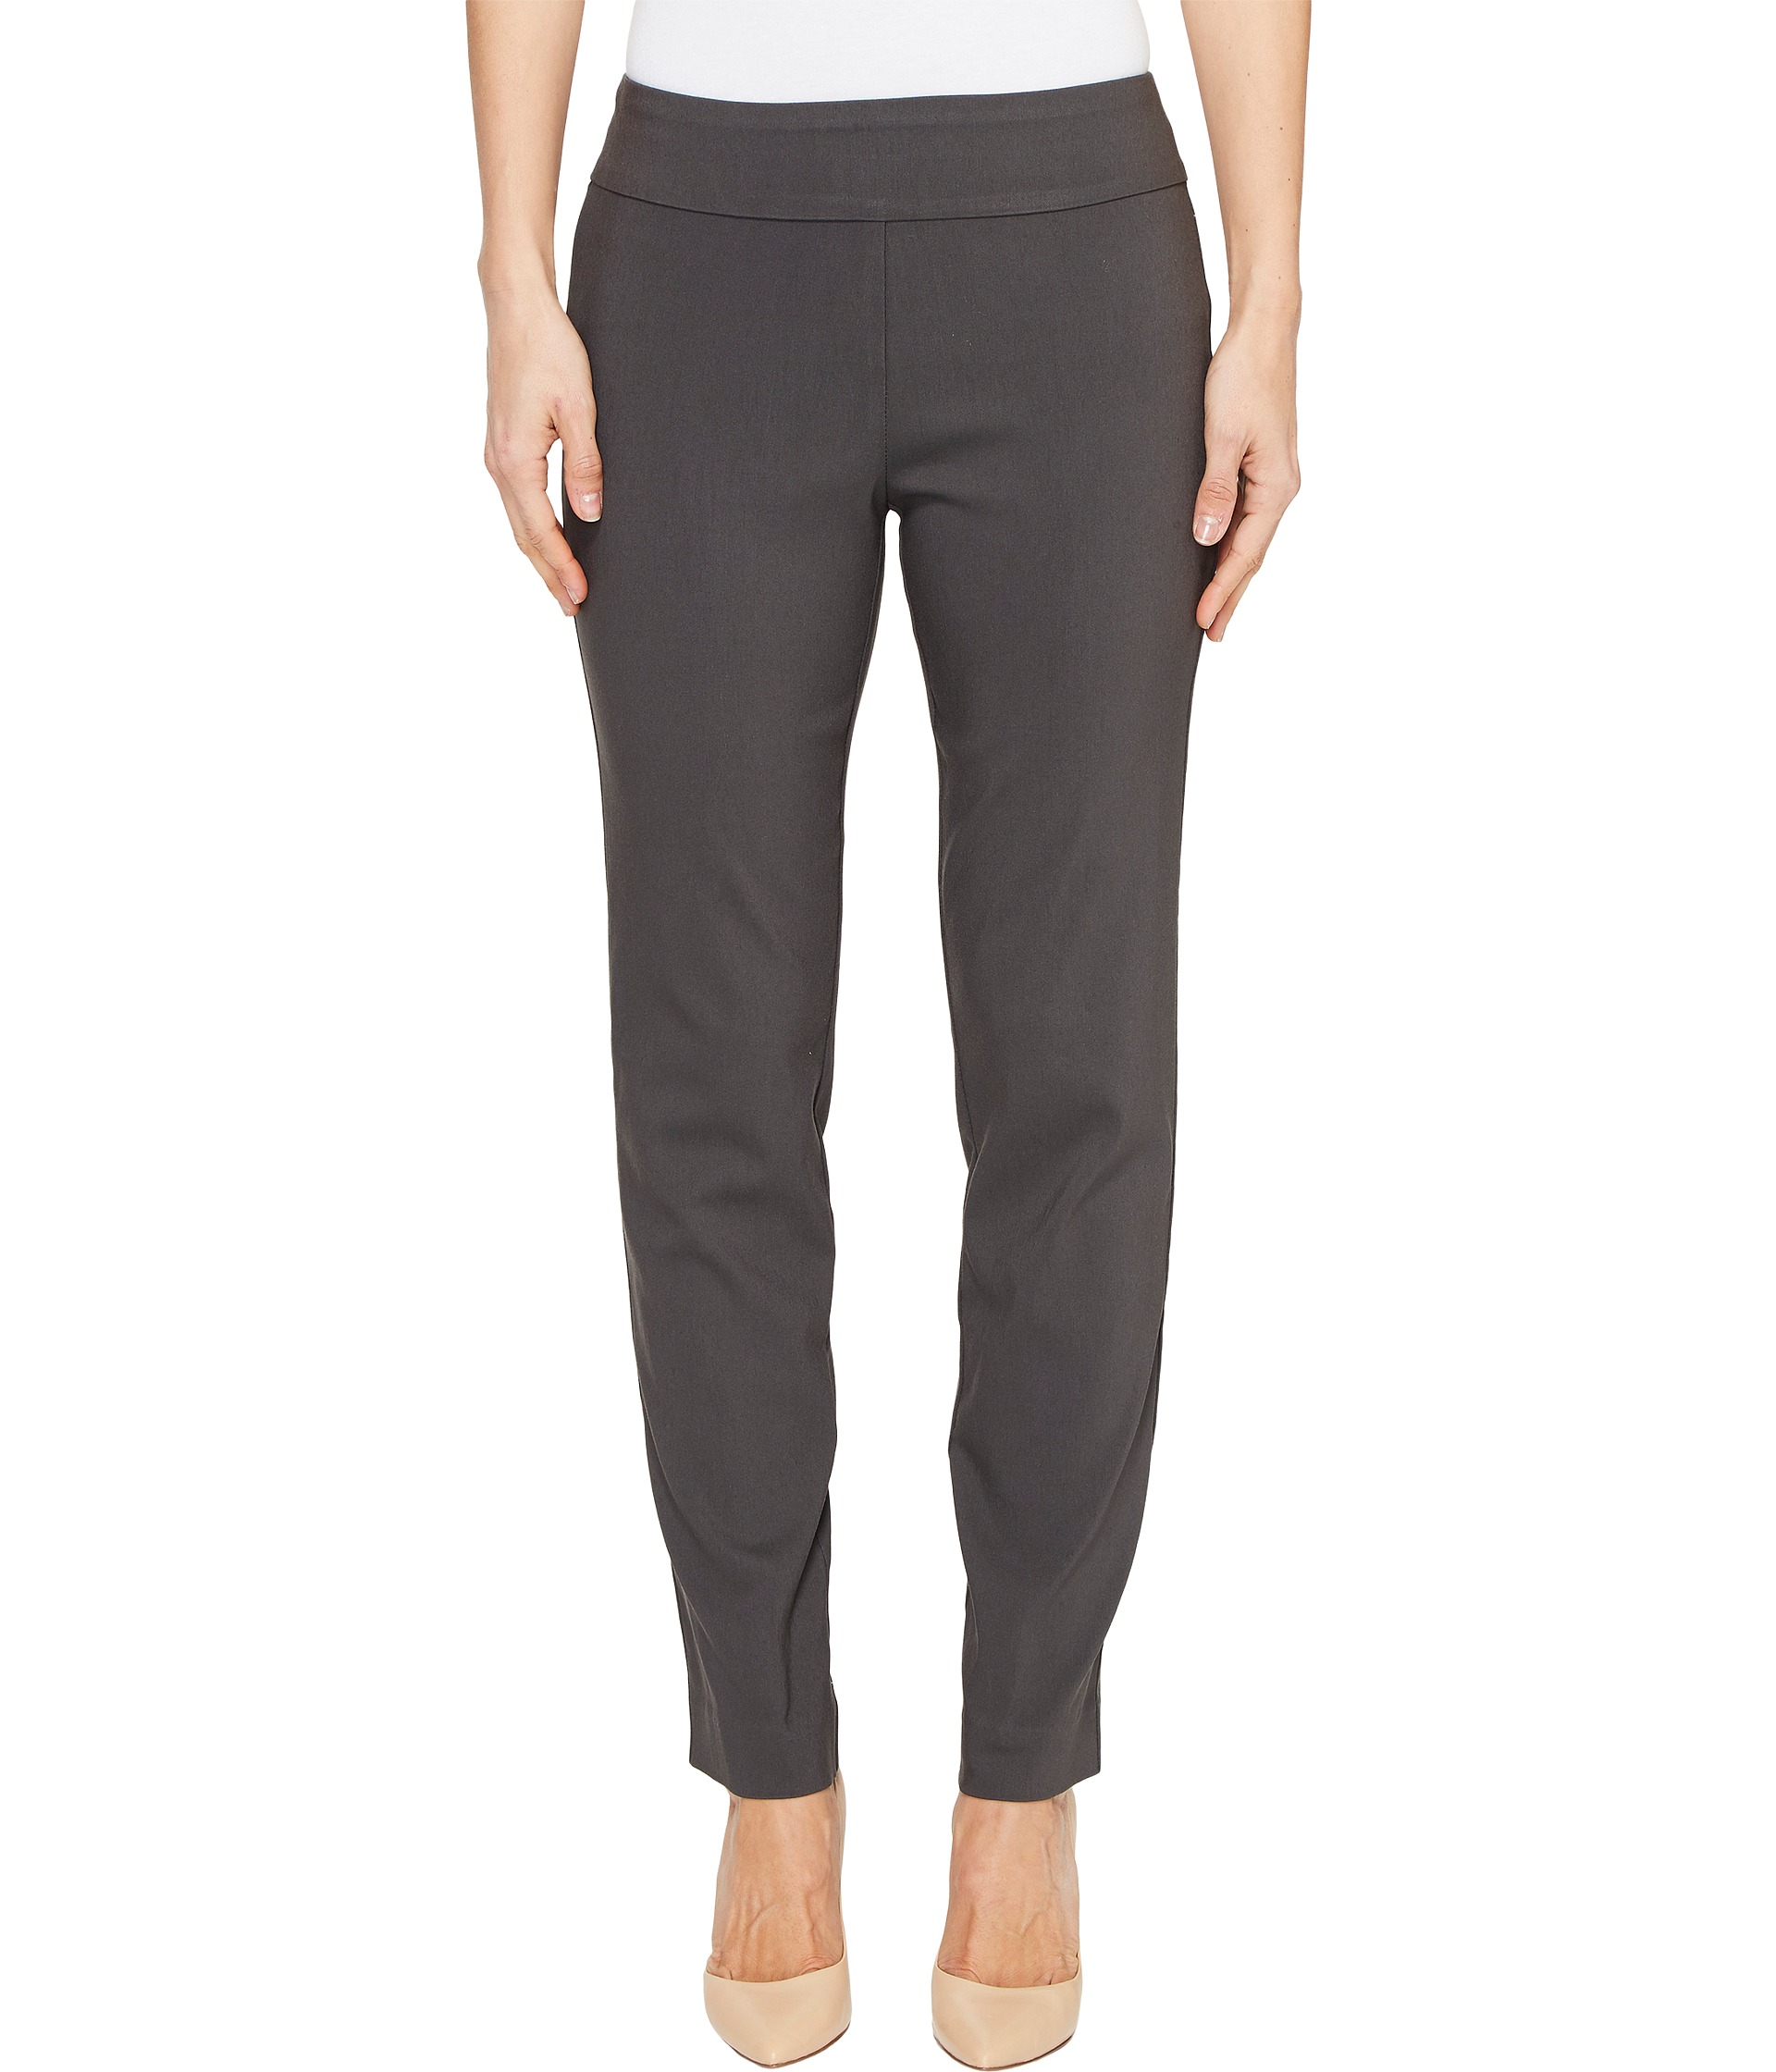 Krazy Larry Pull-On Ankle Pants at Zappos.com